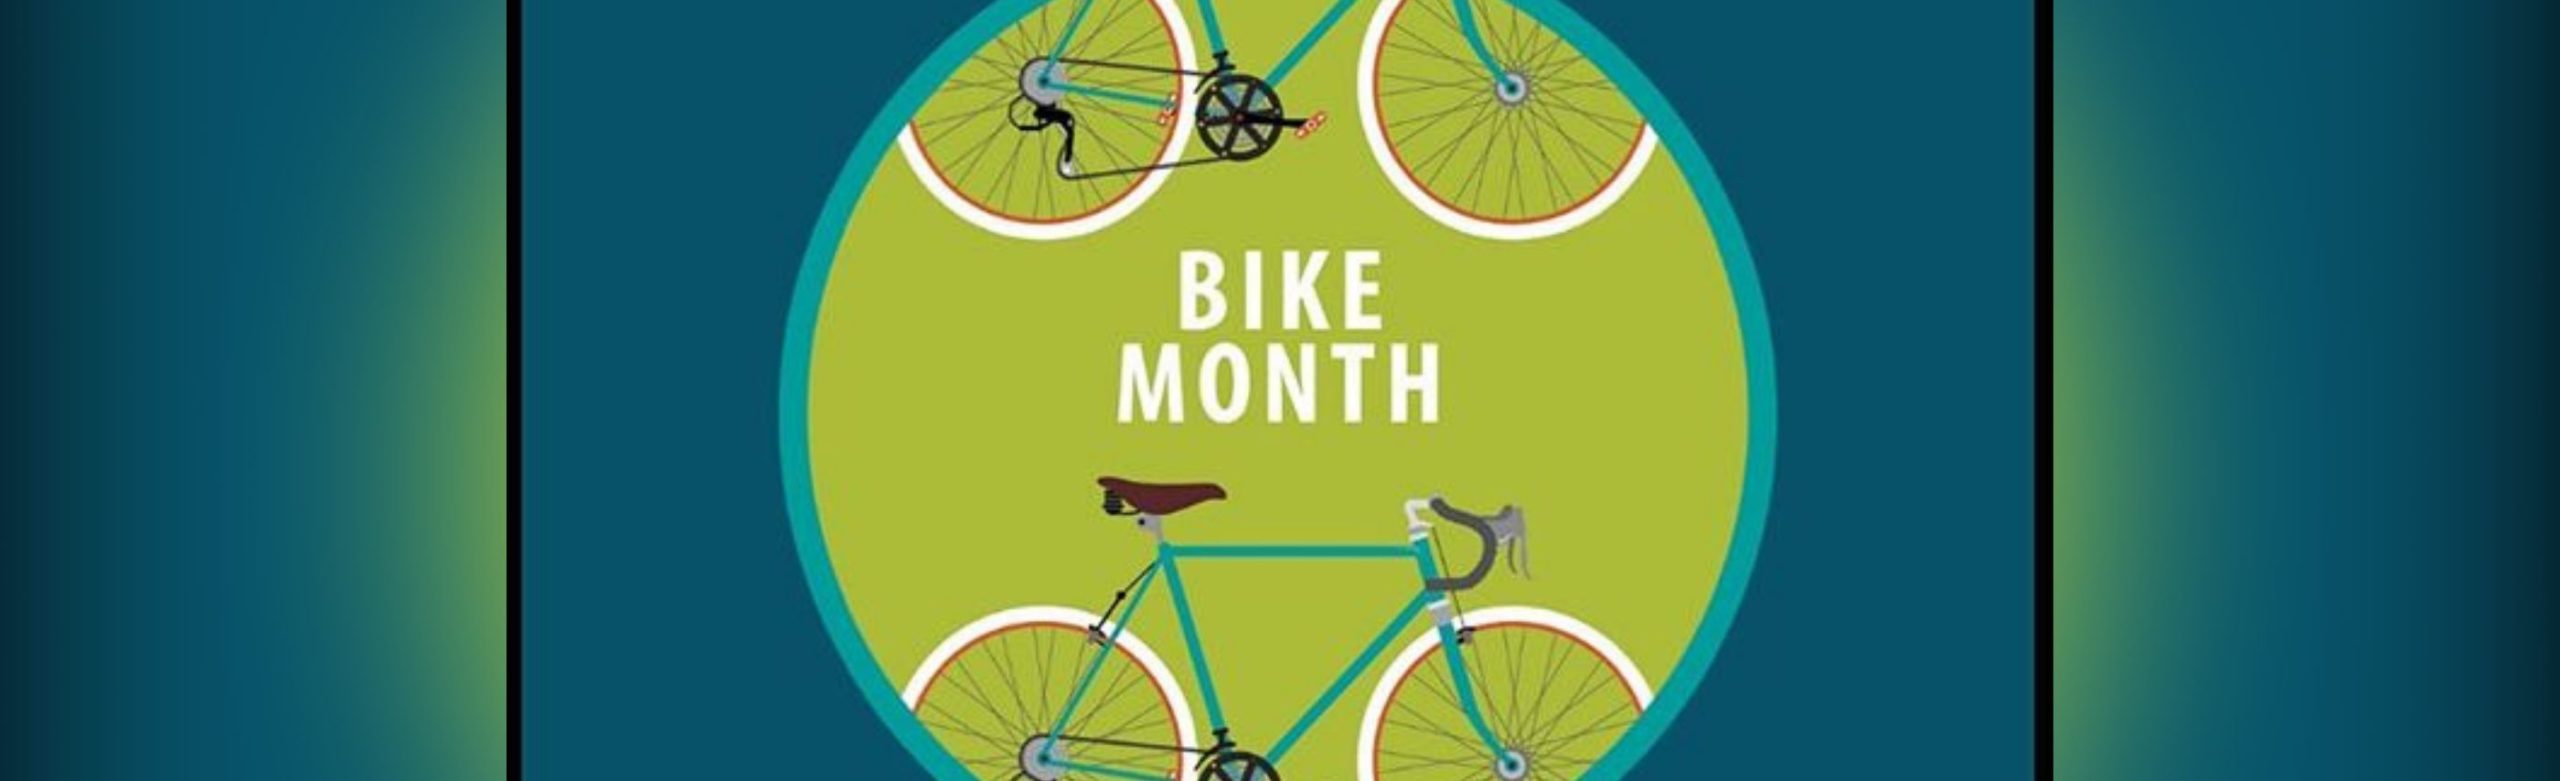 May is Bike Month in Missoula Image